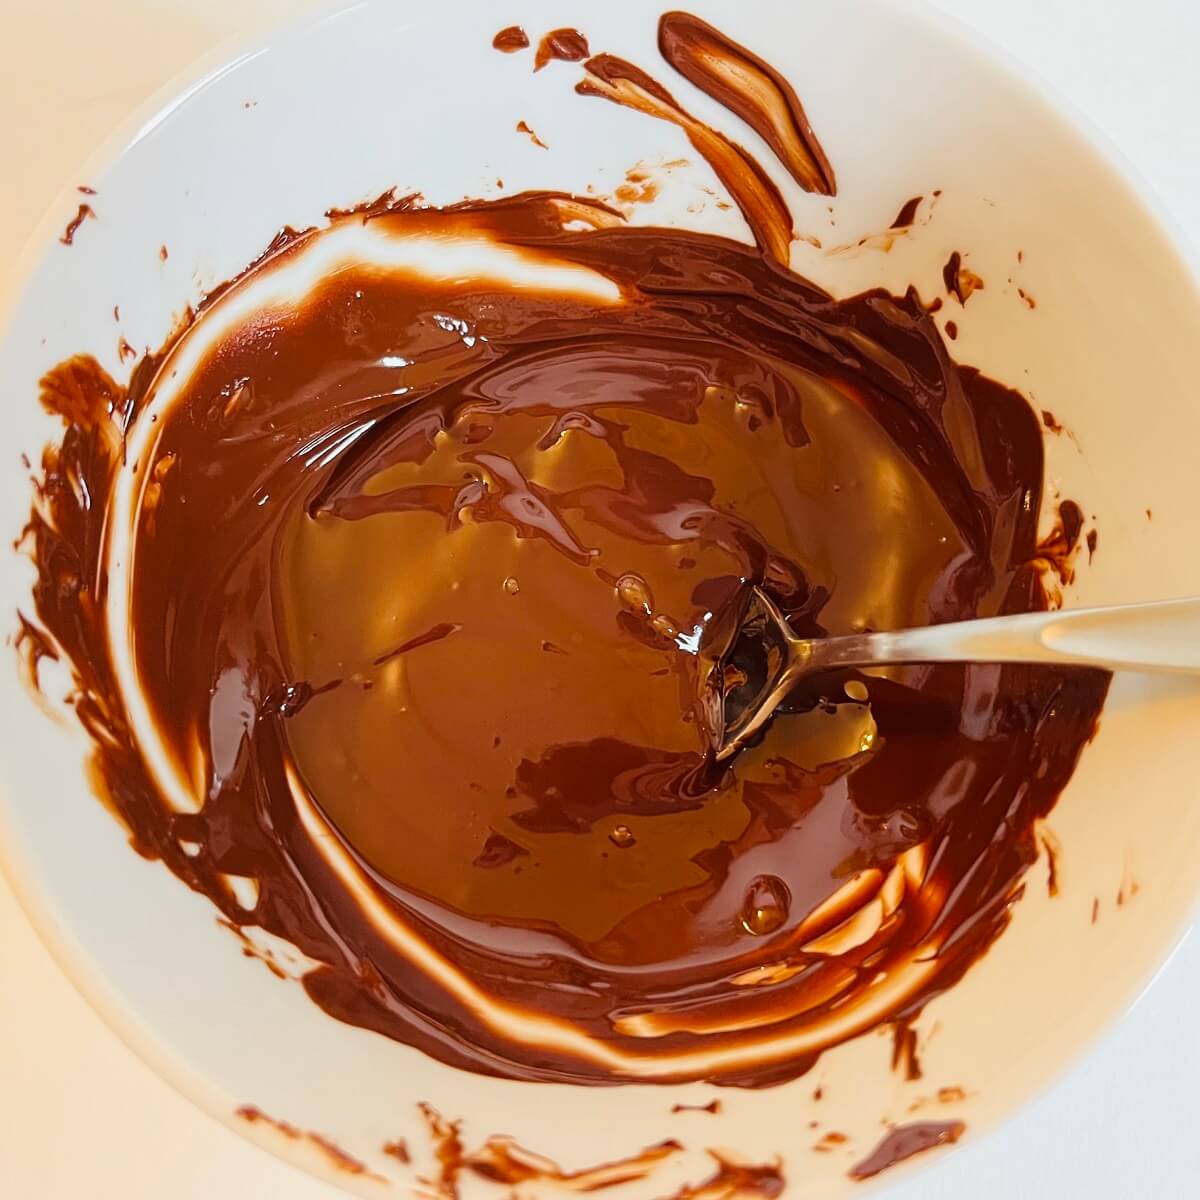 Melted chocolate chips in a white bowl with a spoon.